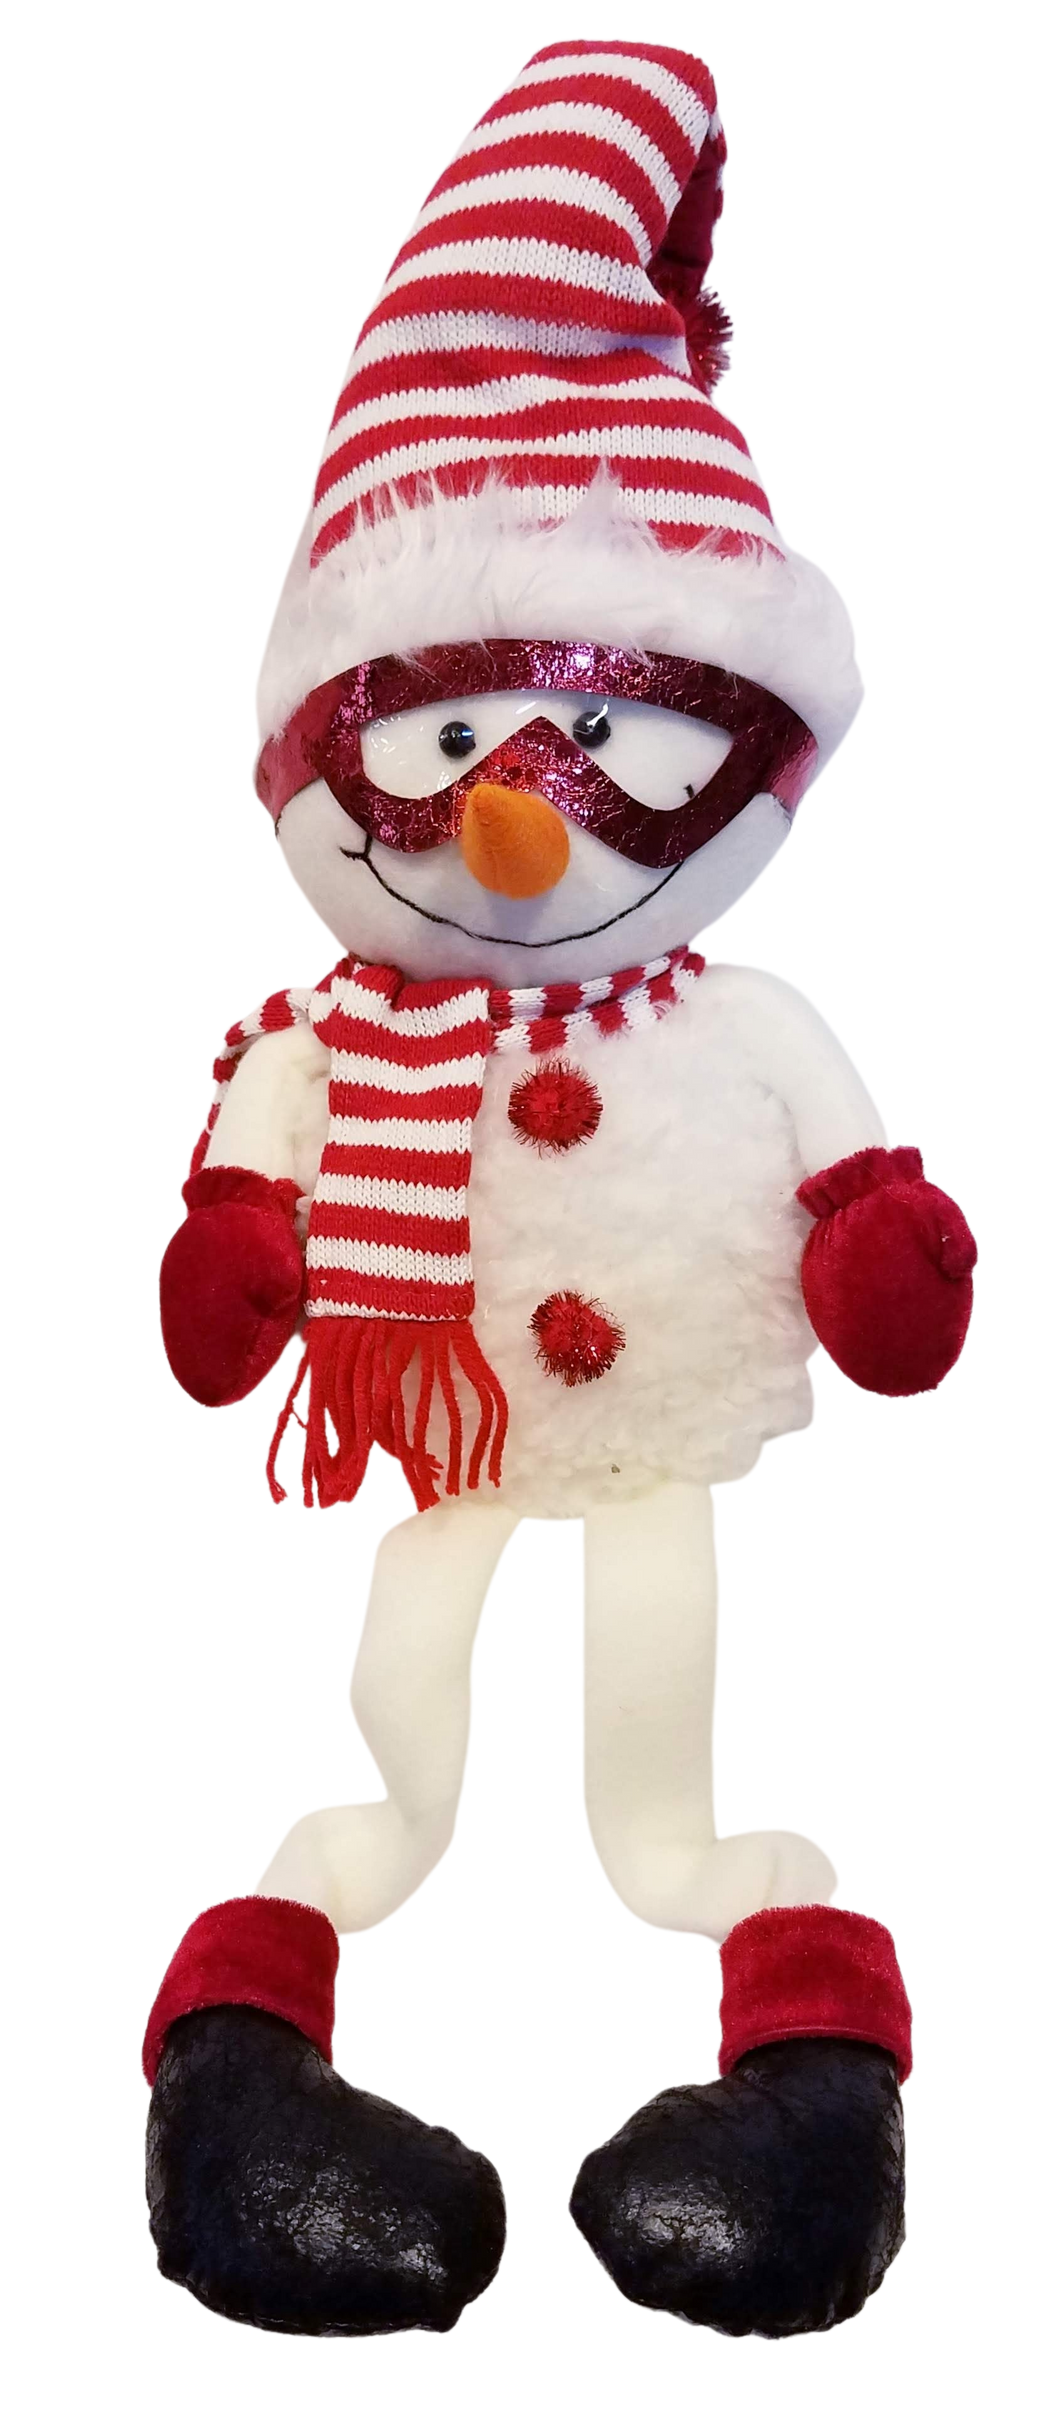 Plush Shelf Sitter Snowman with Red and White Scarf and Glasses 19